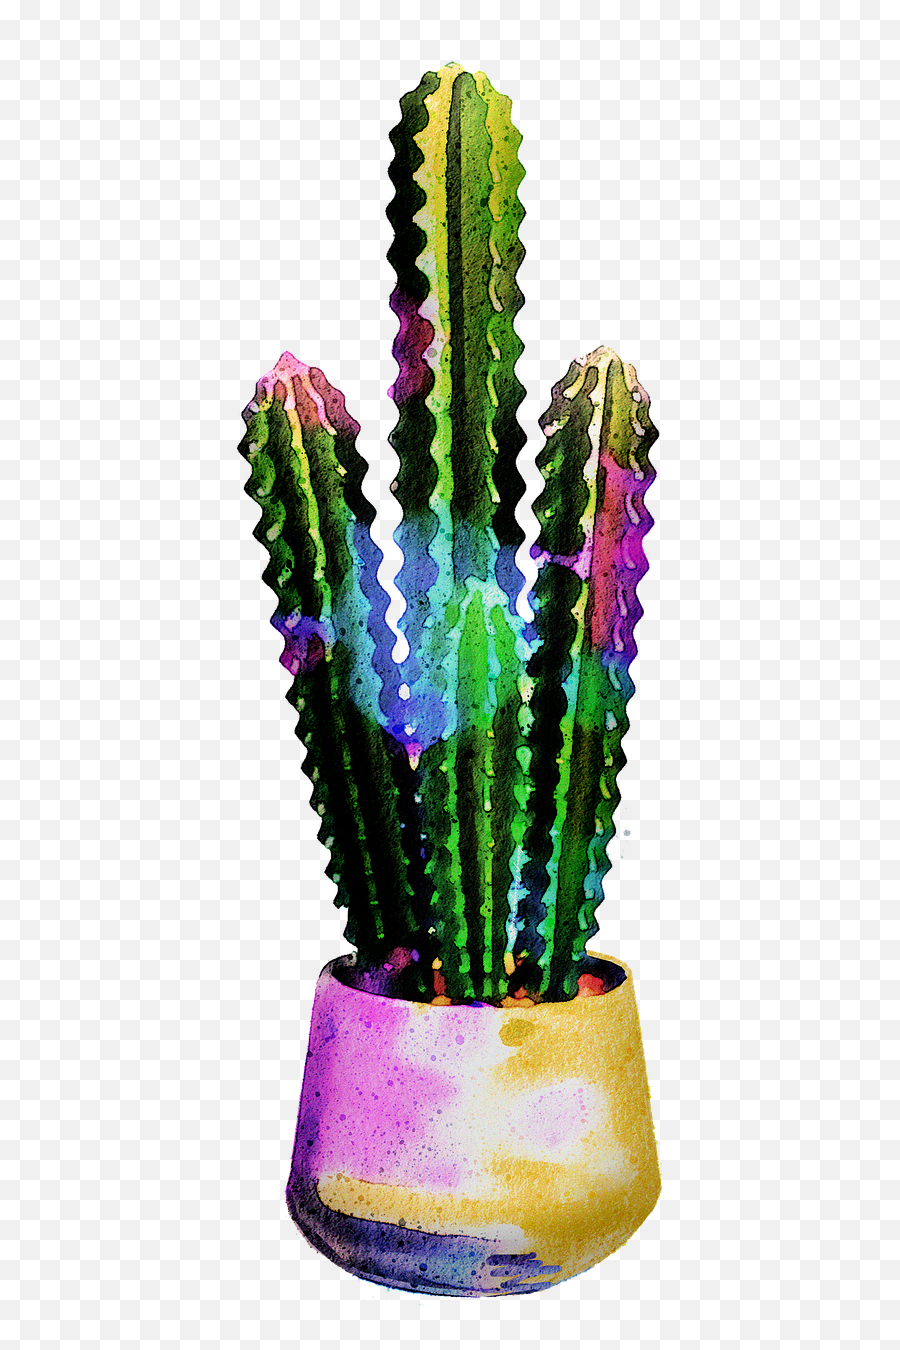 Watercolor Cactus Succulents Cacti - Free Image On Pixabay Potted Cactus Png,Cactus Transparent Background